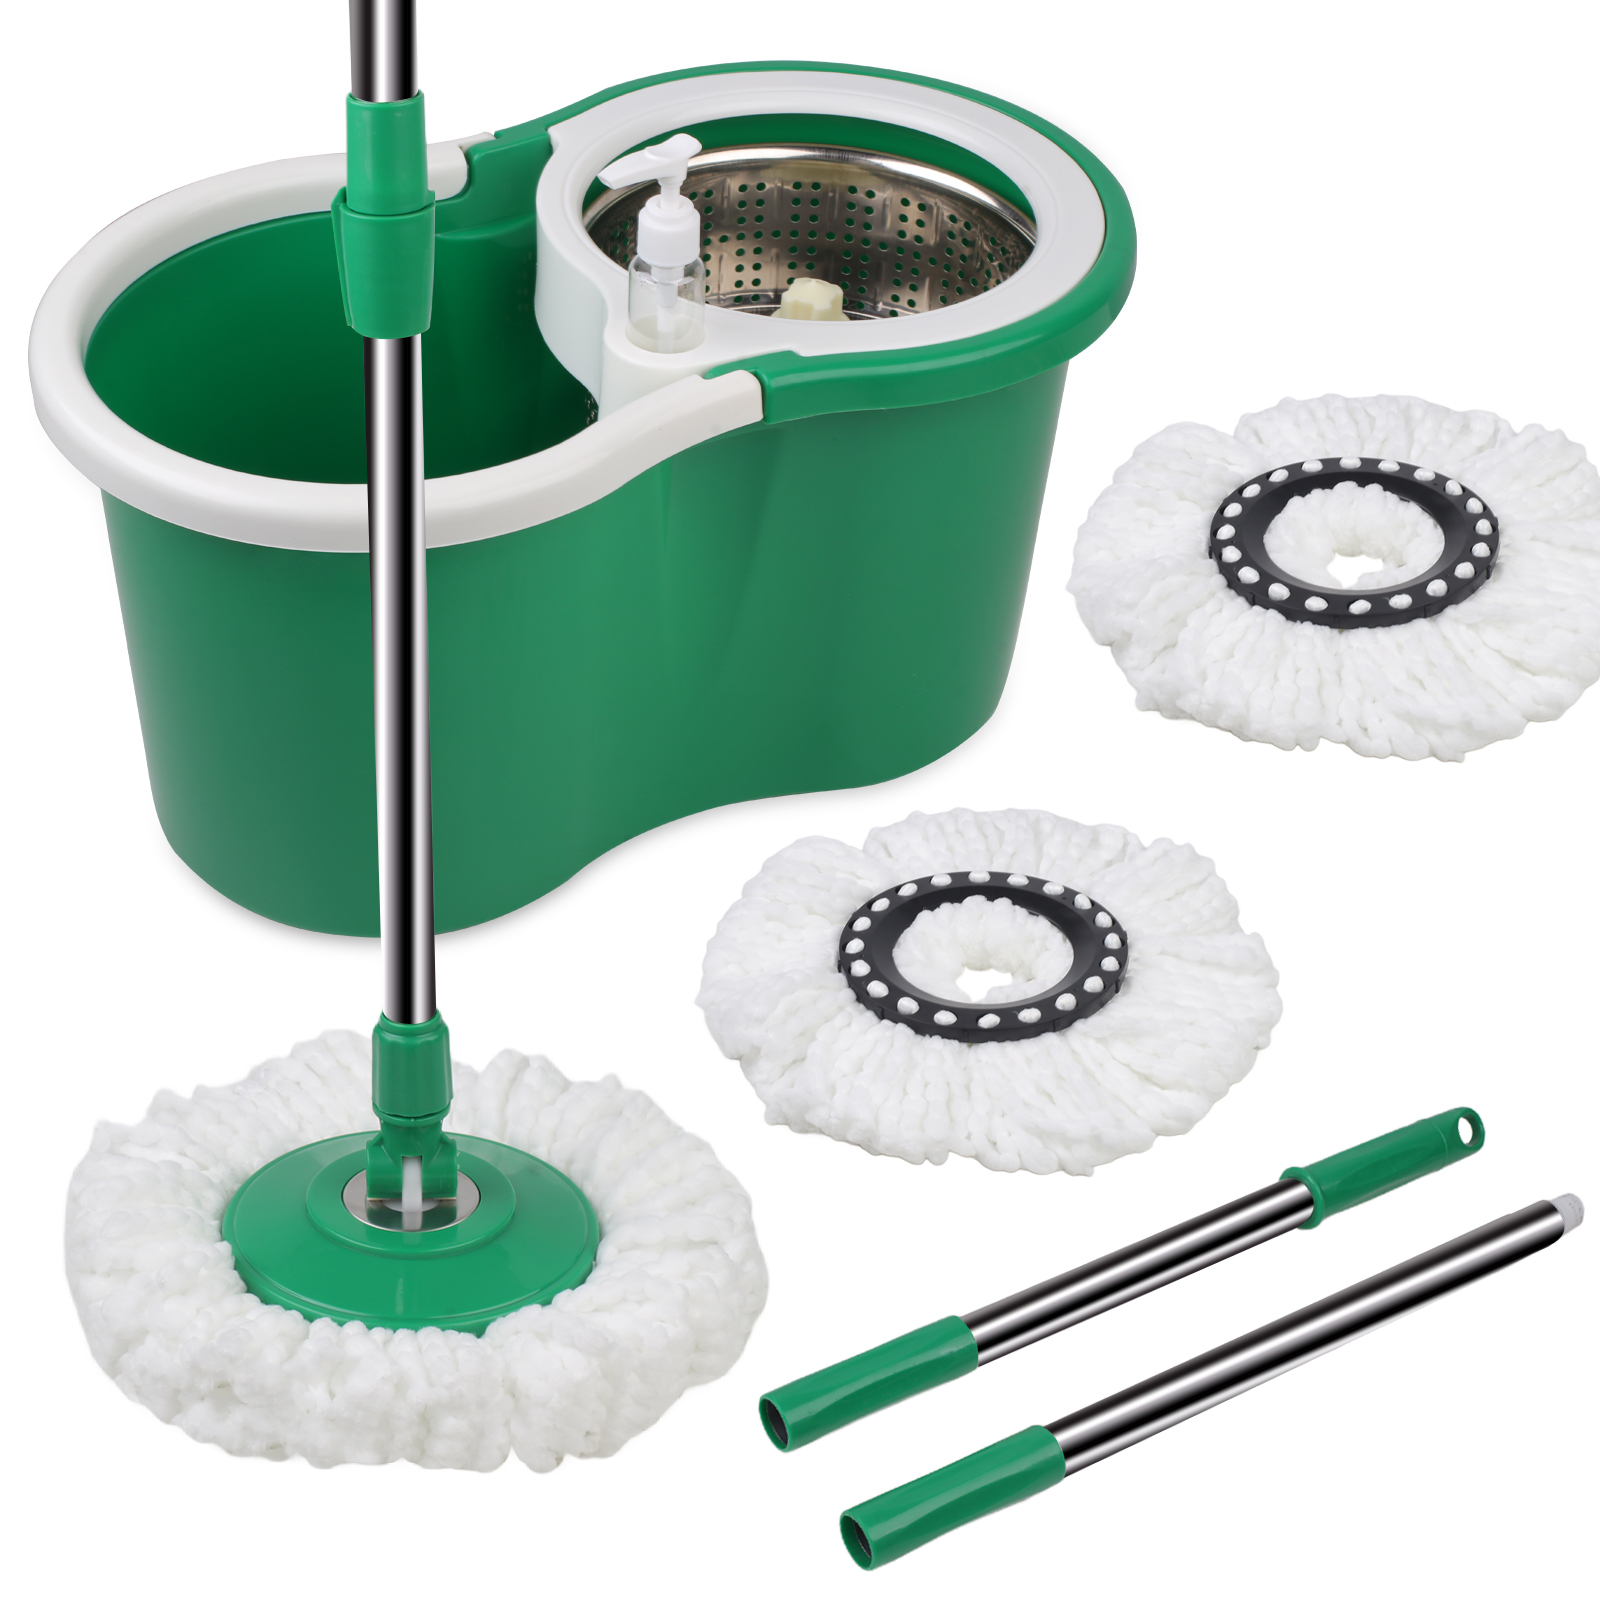 

Spin Mop System - Mop And Bucket With Wringer Set For Floor Cleaning - 3 Total Mop Heads Included, Green